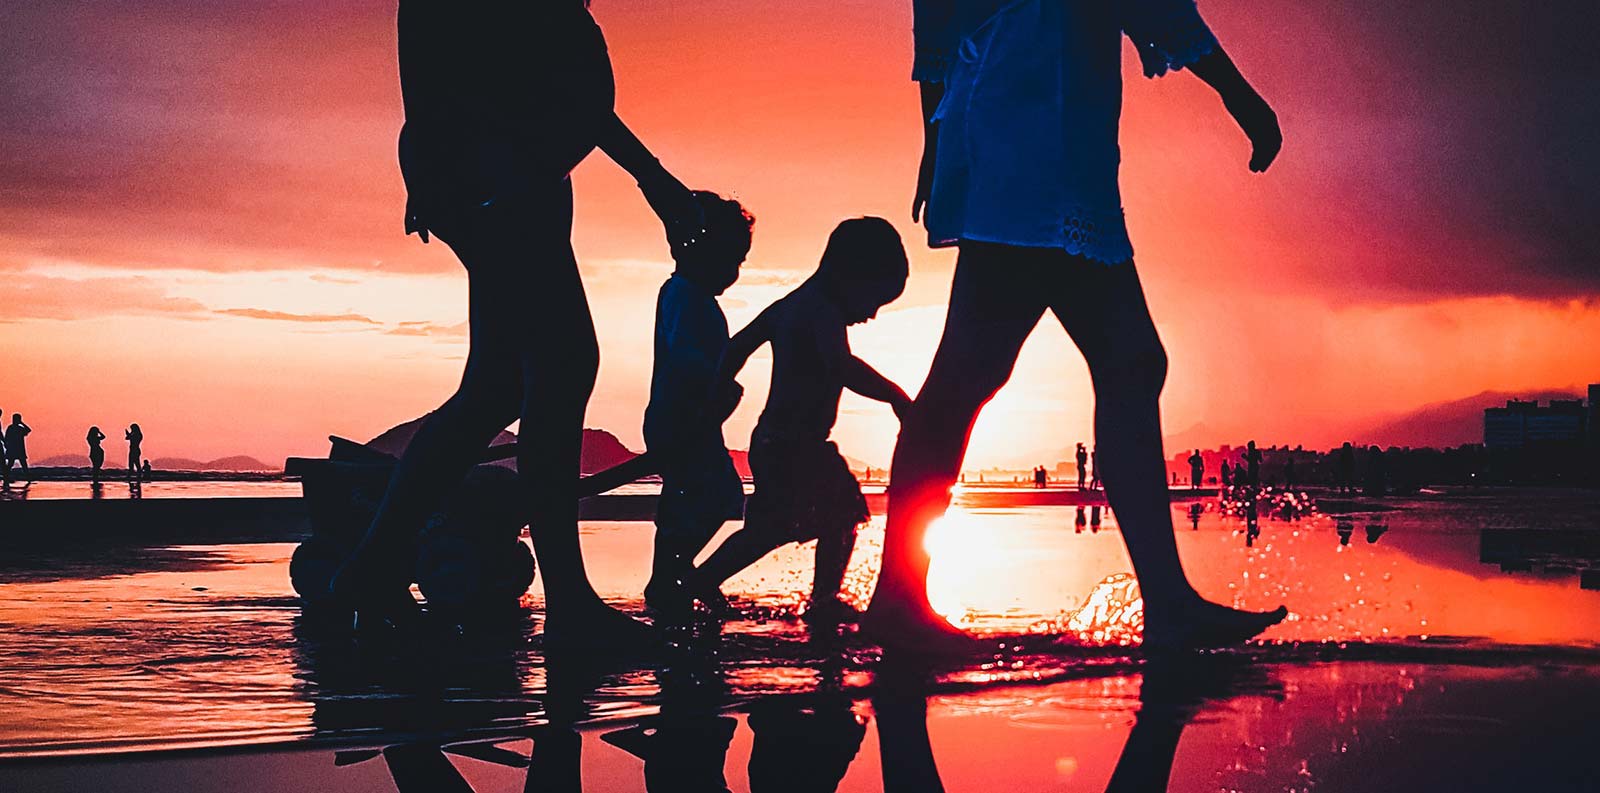 Family of campers walking on Saint-Hilaire beach at sunset